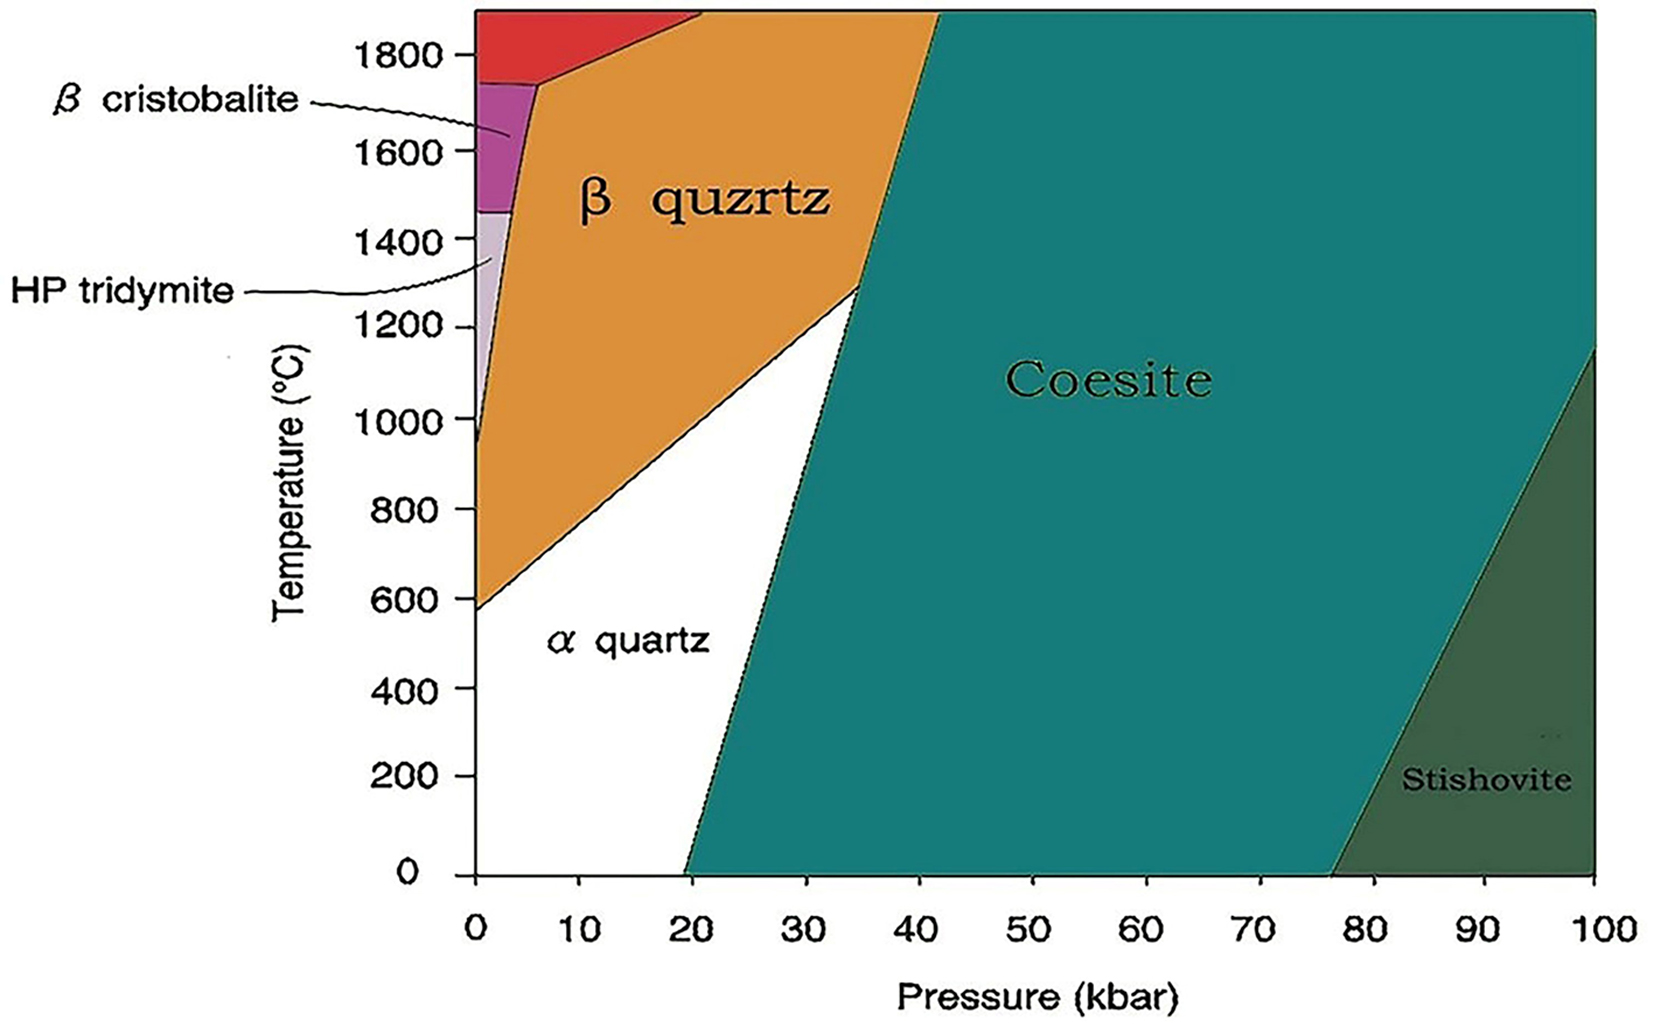 Recent advances in the marketing, impurity characterization and purification of quartz